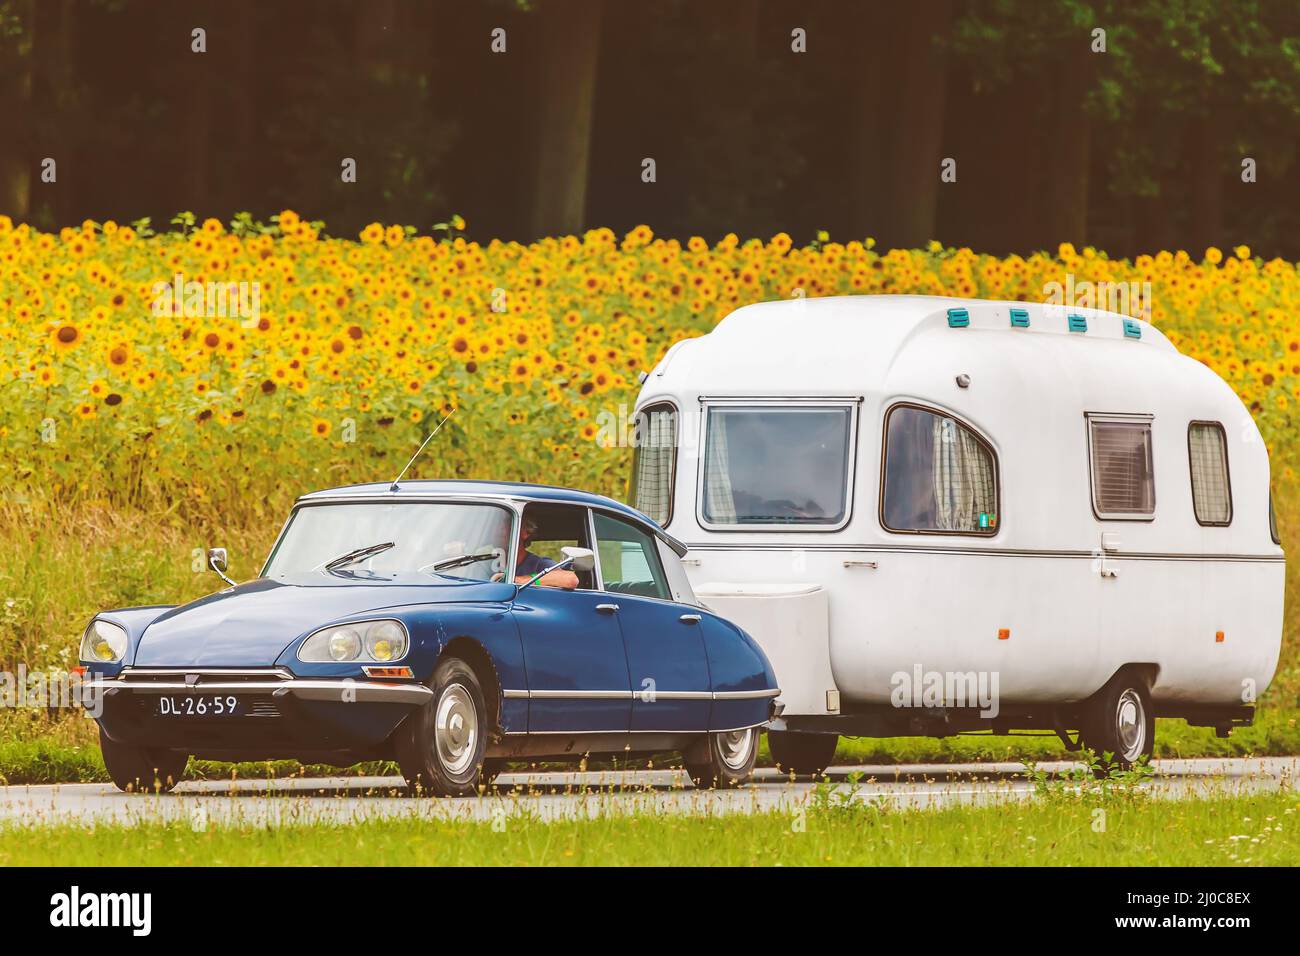 DIEREN, THE NETHERLANDS - AUGUST 14, 2016: Retro styled image of a Vintage Citroen DS with caravan on a local road in front of a field with sunflowers Stock Photo